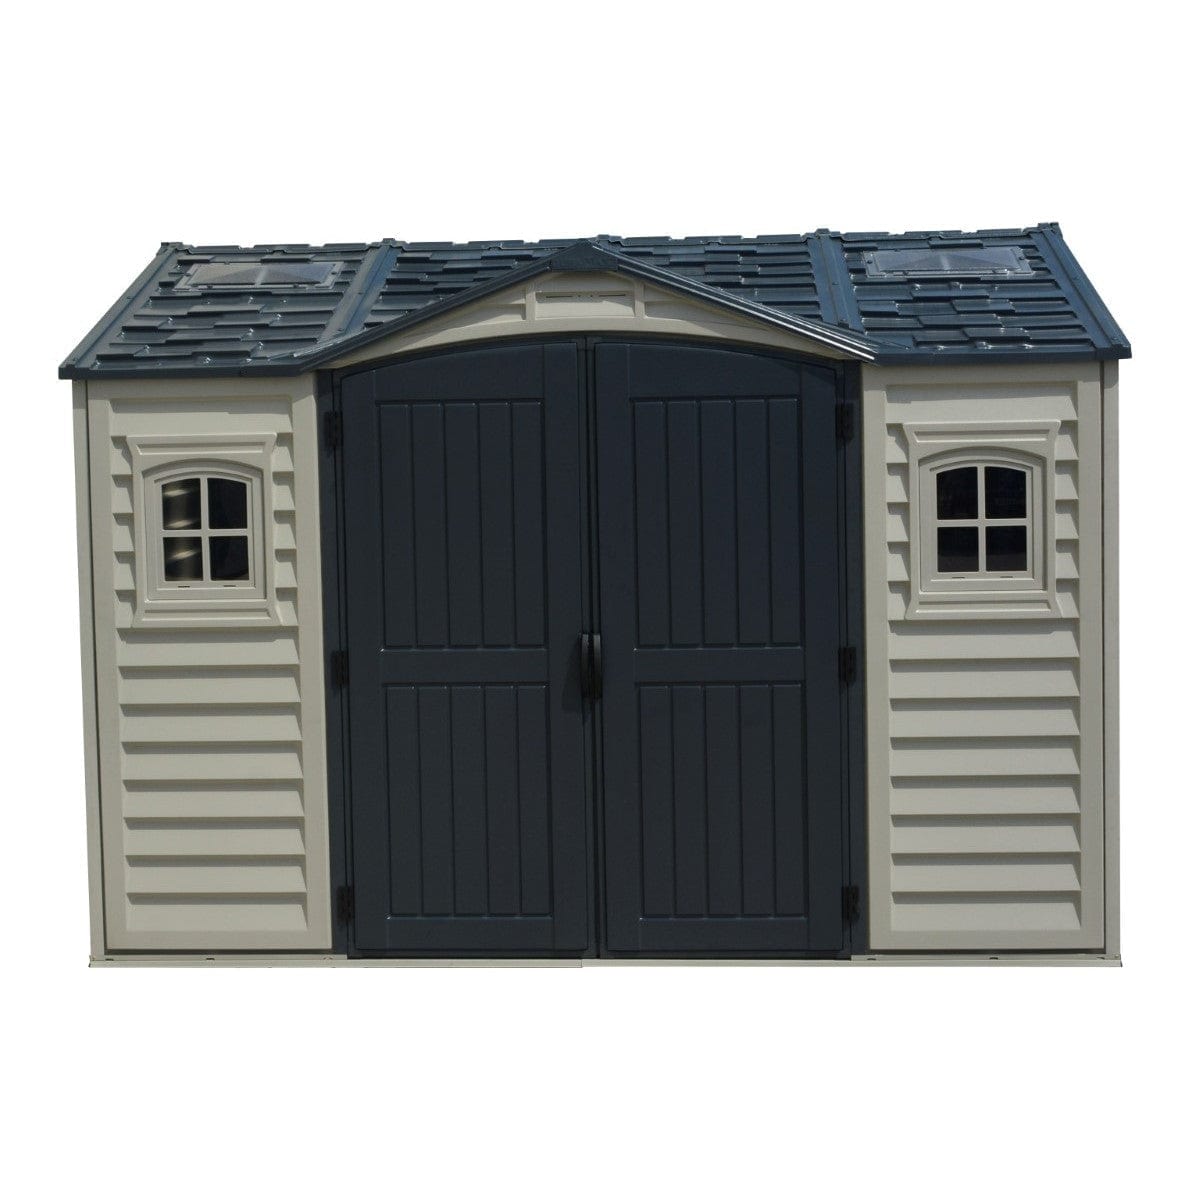 Duramax Vinyl Storage Shed Kit with Foundation DuraMax | Vinyl Storage Shed Apex Pro 10.5' x 8' x 6' with Foundation, 2 Windows & a Sidedoor | Eastern States 40116_NJ